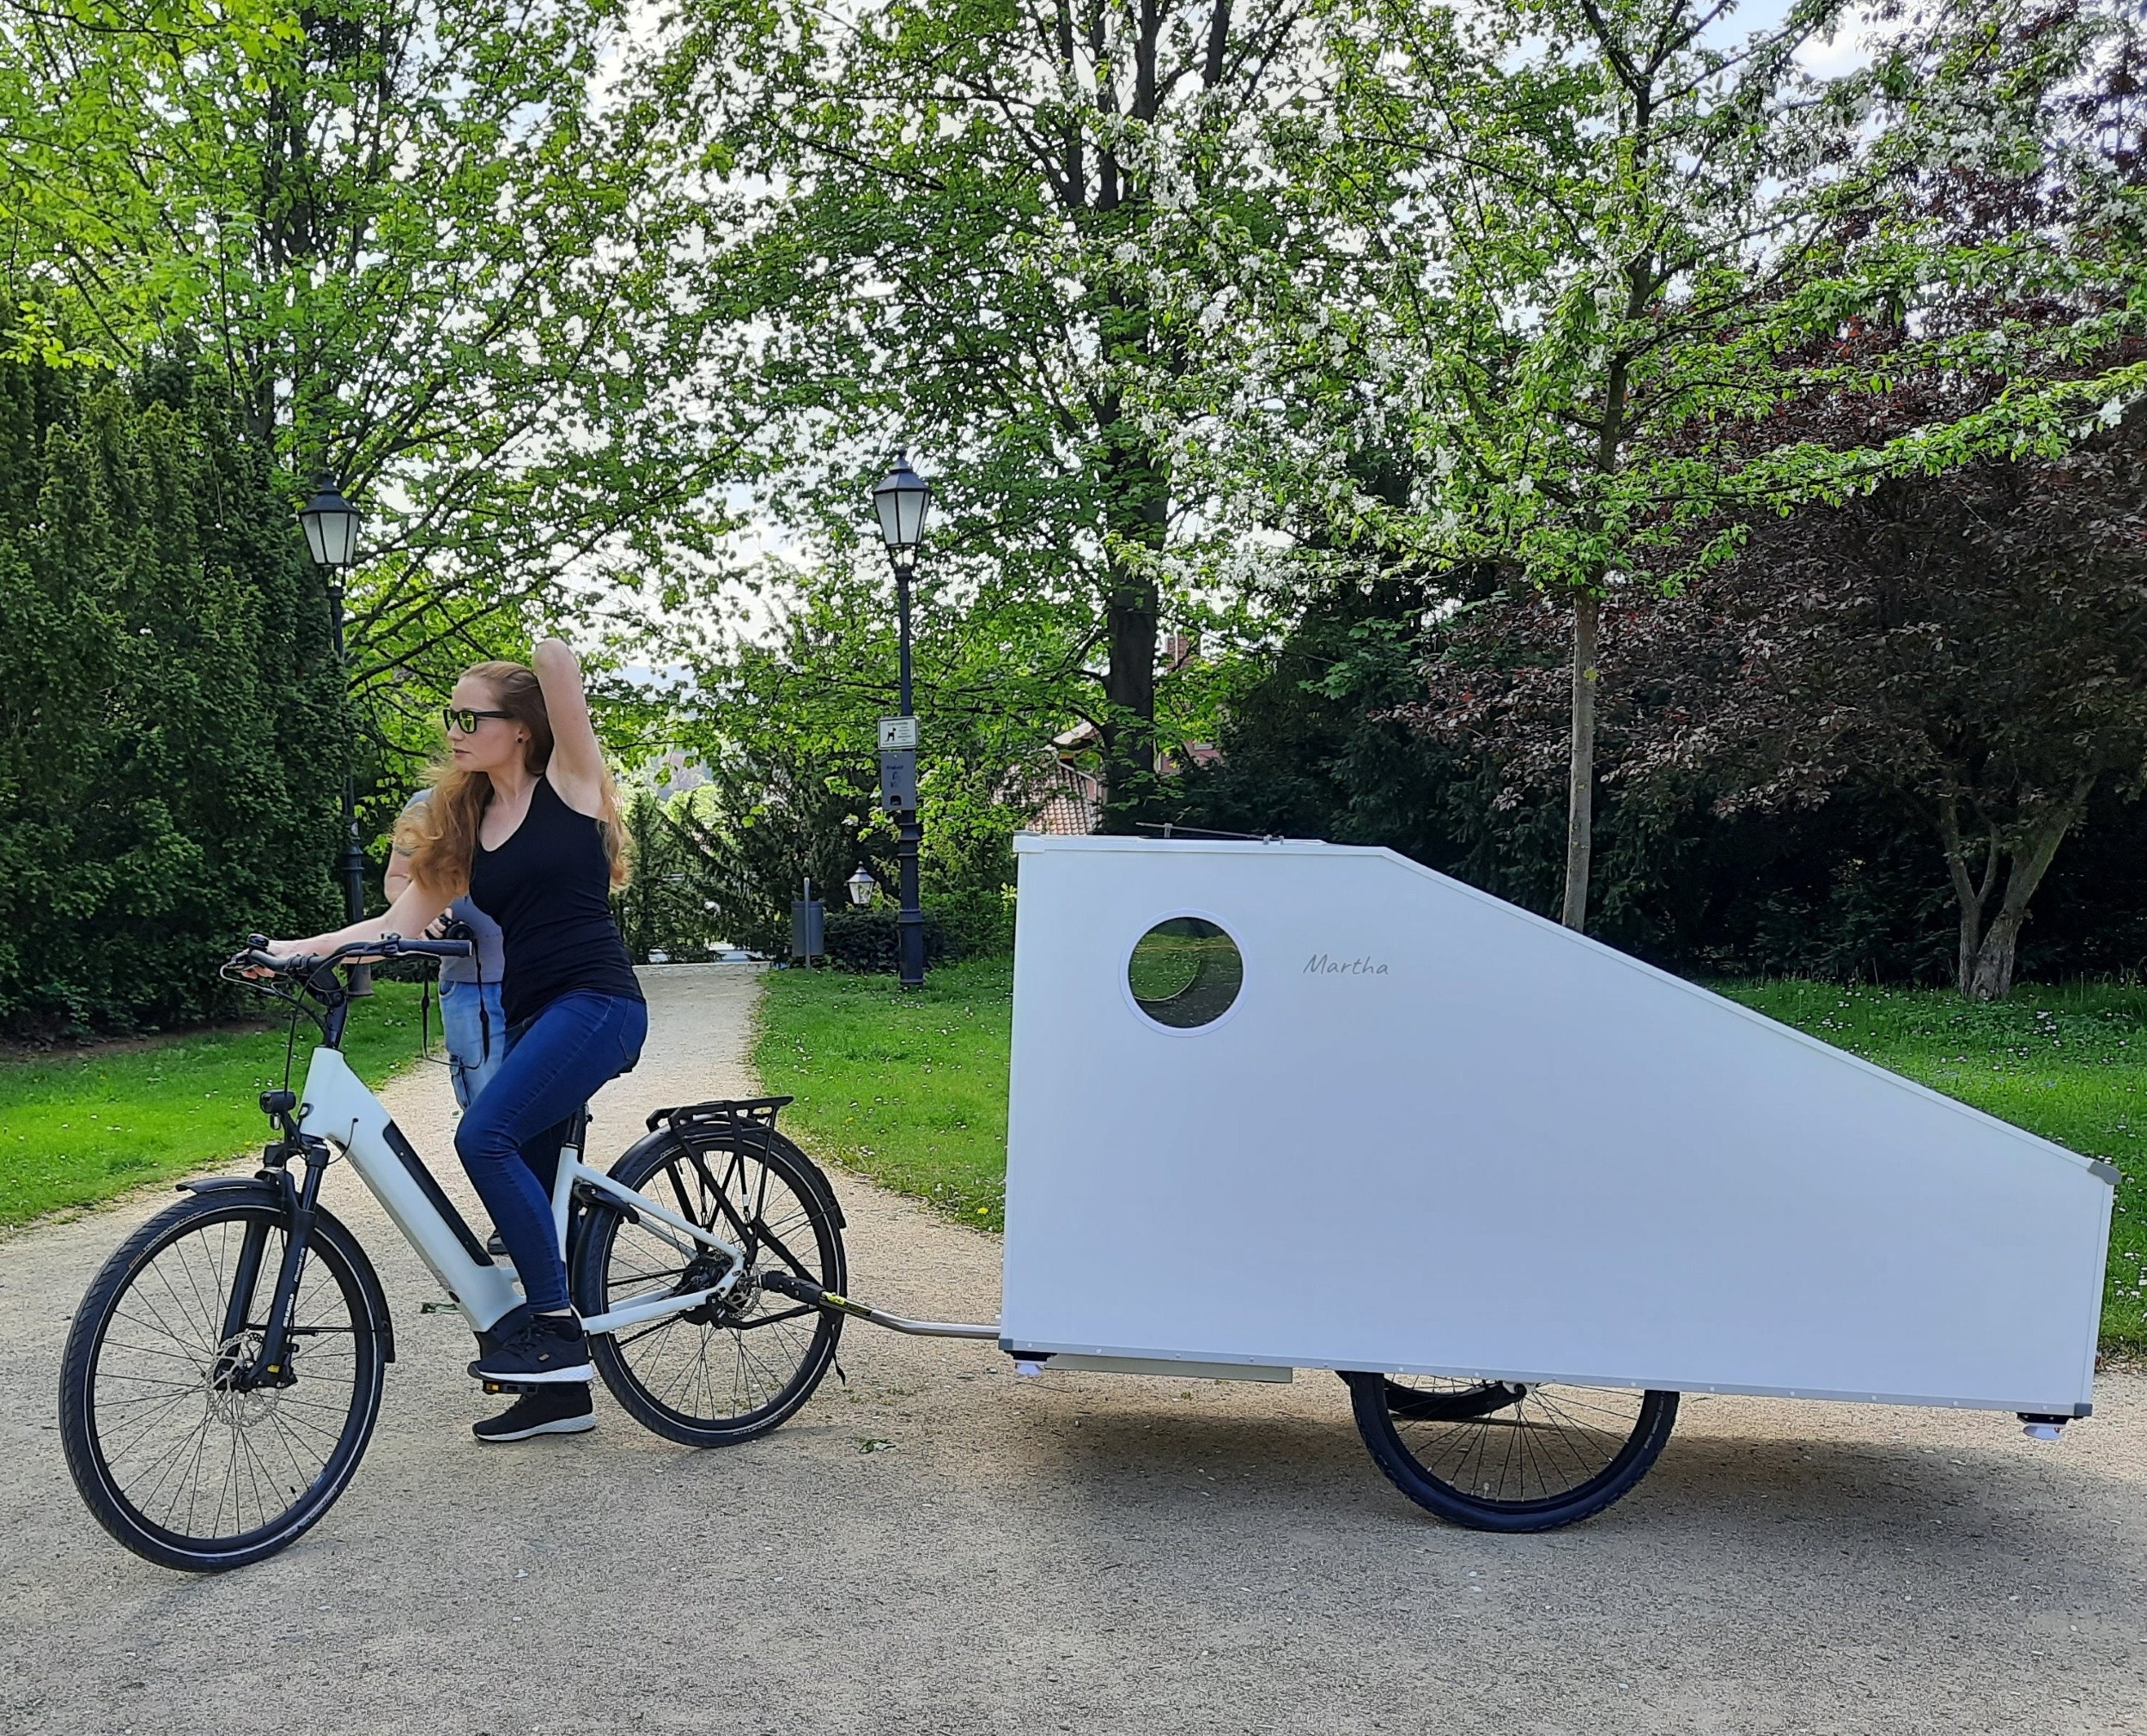 https://s1.cdn.autoevolution.com/images/news/gallery/the-martha-e-bike-trailer-is-a-downsized-rv-for-cyclists-who-dont-want-to-rough-it_1.jpg